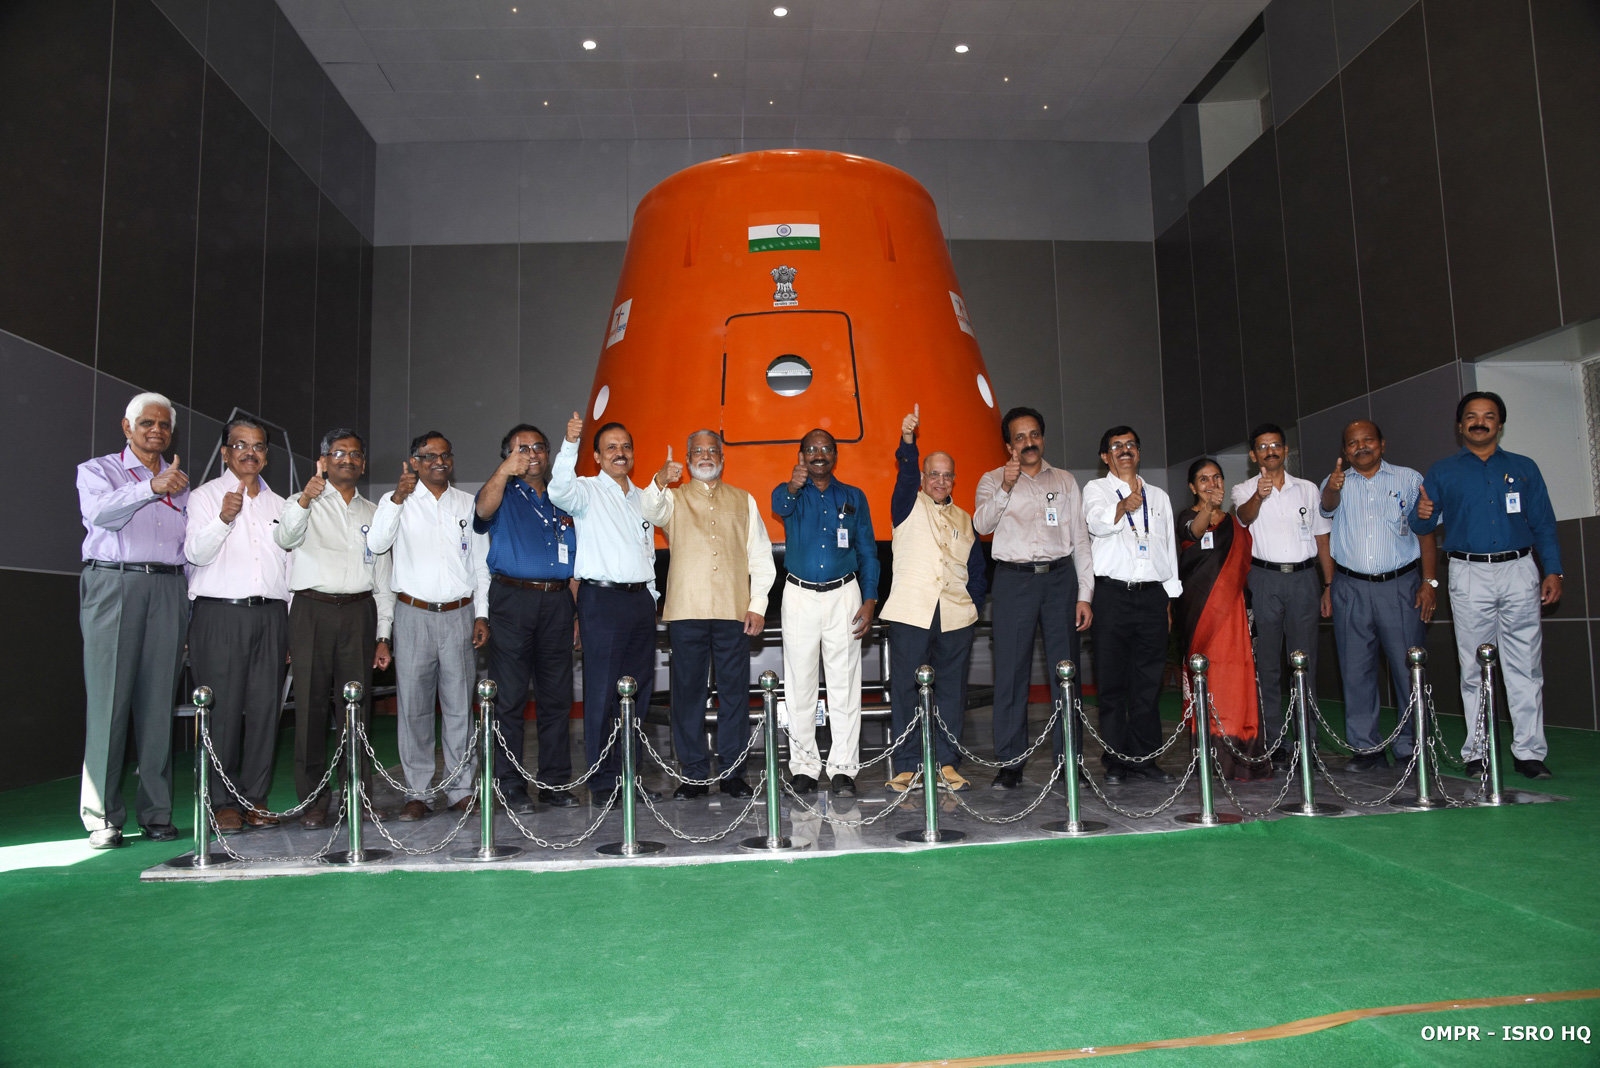 India opens its first center for human spaceflight | DeviceDaily.com